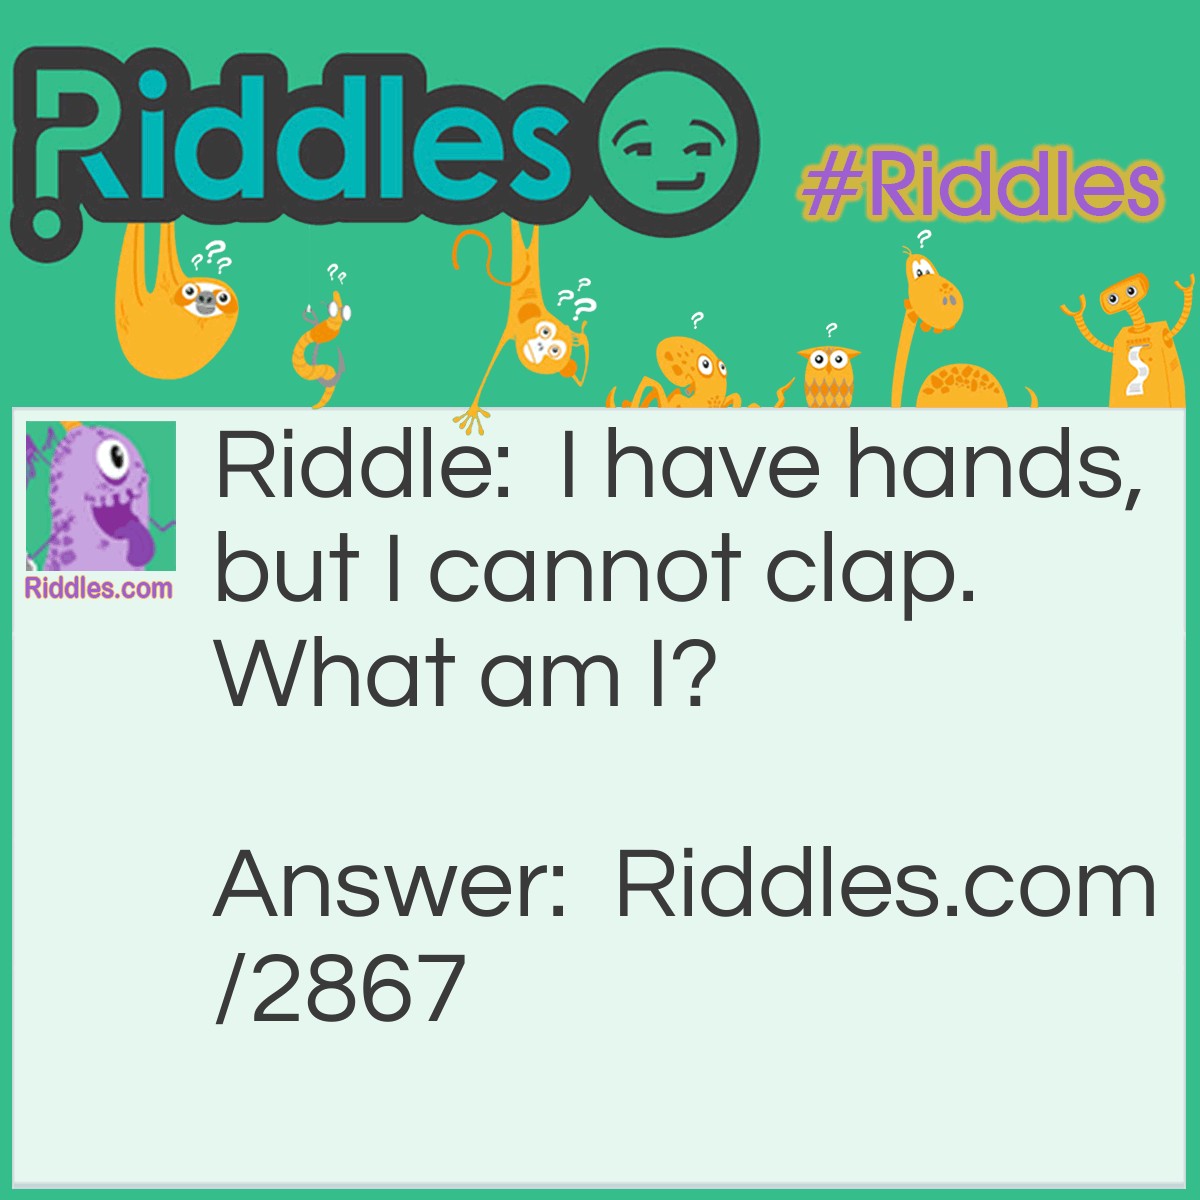 Riddle: There was once a rich man who lived in a large circle house, one day he woke up and found that someone had spilt jam all over his new shirt. When he asked who did it, the 1st servant said "it wasn't me I was cooking." The 2nd servant said " It wasn't me I was tiding up the books" the 3rd servant said "It wasn't me I was dusting the corners of the house" Who did it? Answer: The third servant because they said they were dusting the corners of the house, but the house has no corners since it's a circle!